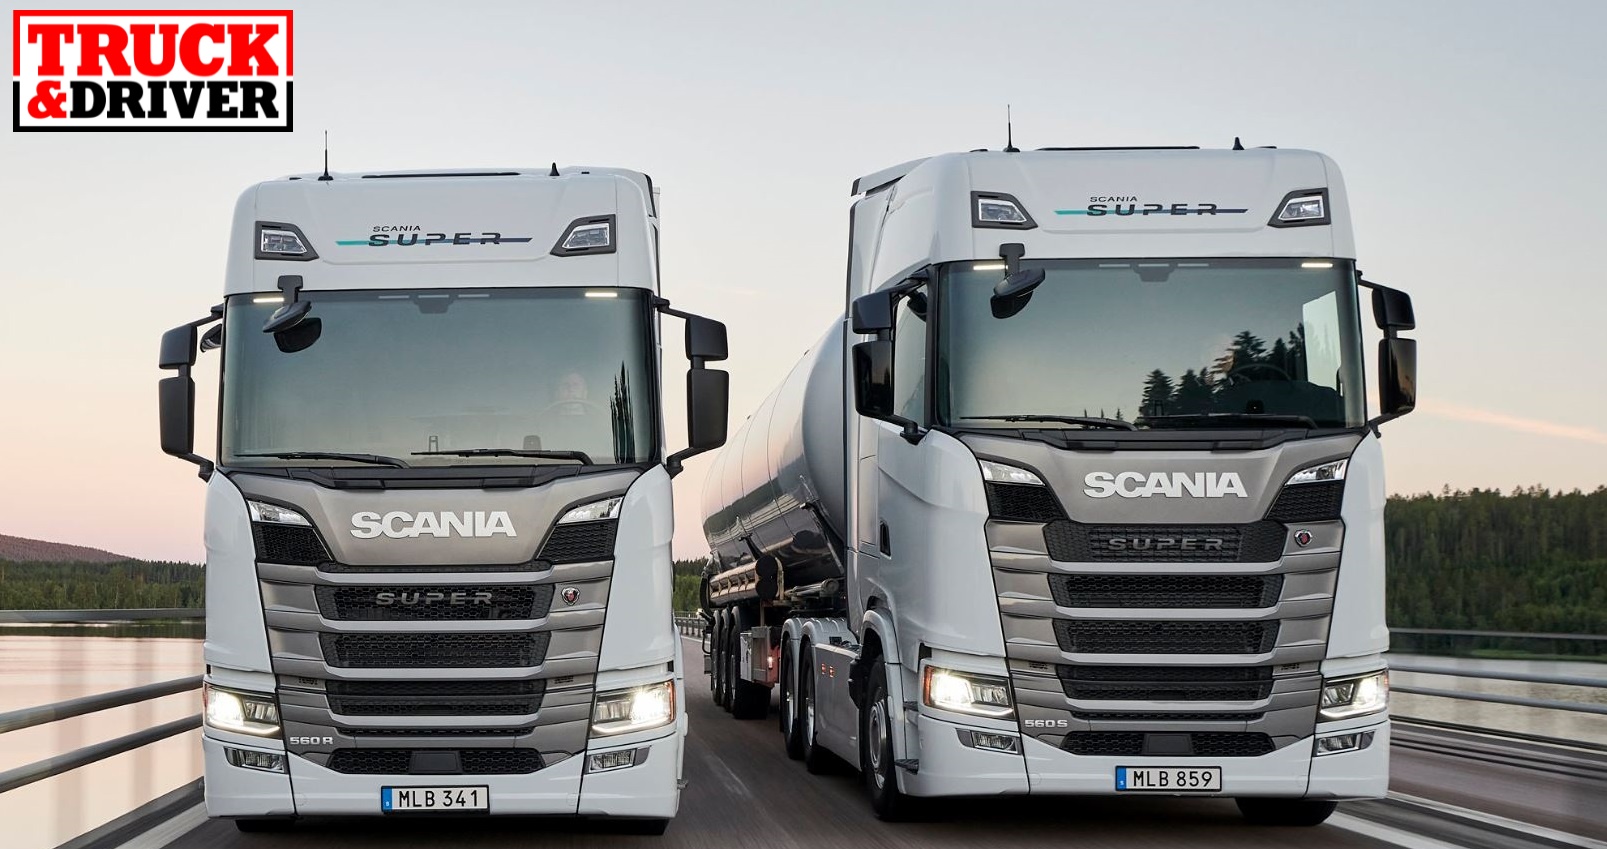 Return of the “Super” Scania! New ultra-efficient drivelines for